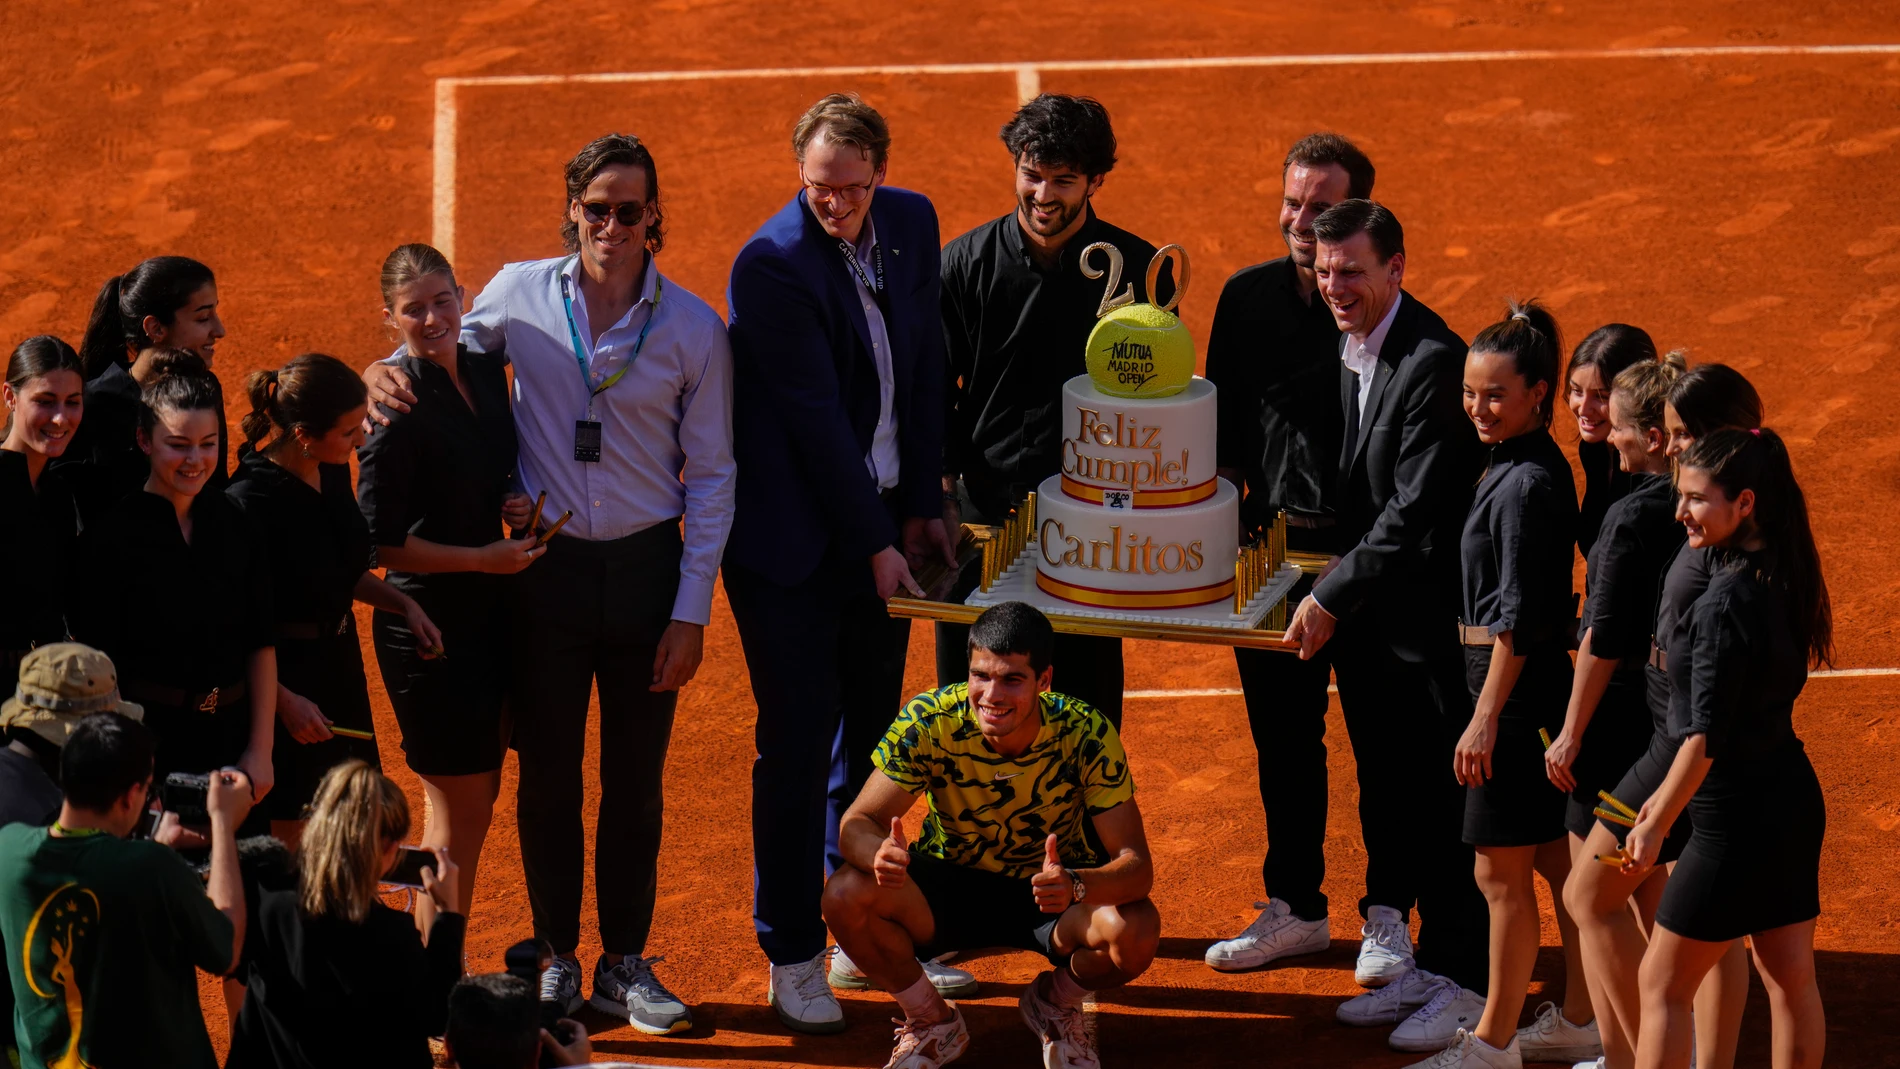 Carlos Alcaraz, of Spain, center down, poses with a cake for his 20th birthday after his victory over Borna Coric, of Croatia, during men's semifinal at the Madrid Open tennis tournament in Madrid, Spain, Friday, May 5, 2023. (AP Photo/Manu Fernandez)